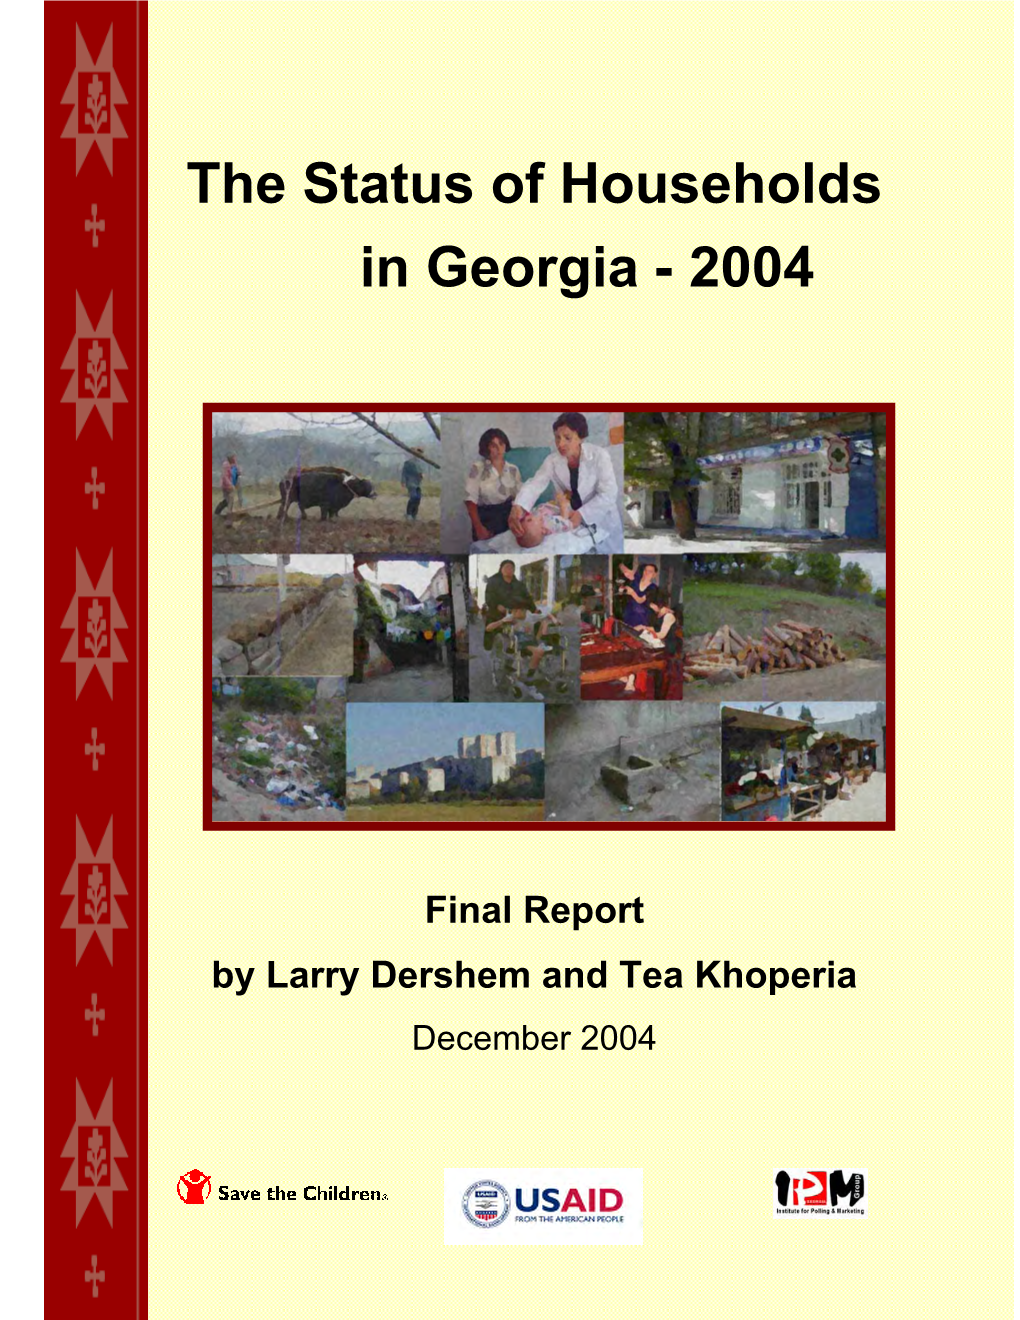 The Status of Households in Georgia - 2004